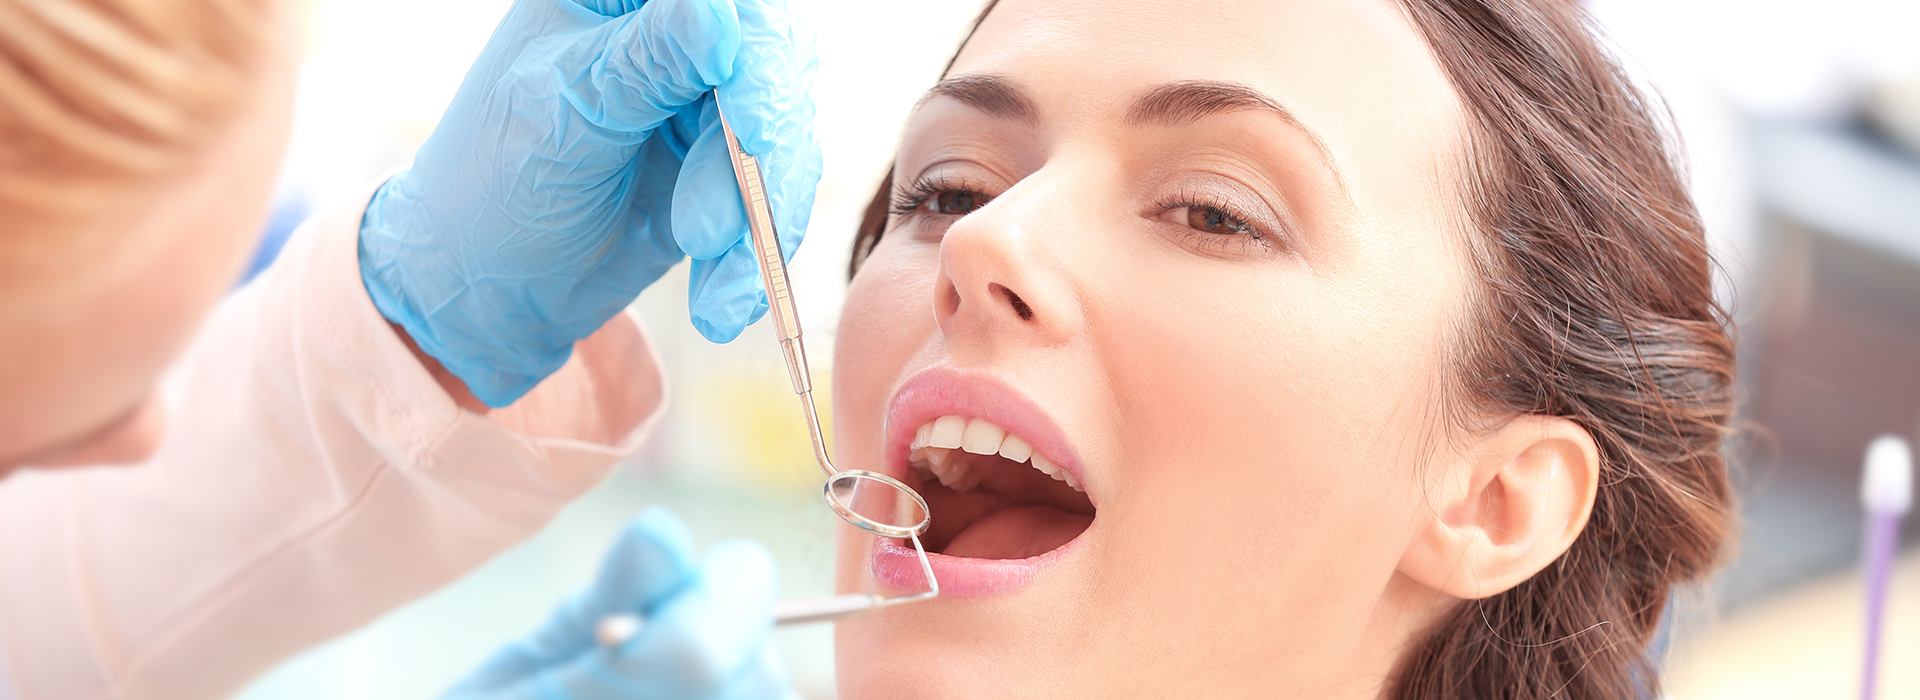 Kraska Center for Cosmetic and General Dentistry | Preventative Program, Cosmetic Dentistry and Emergency Treatment